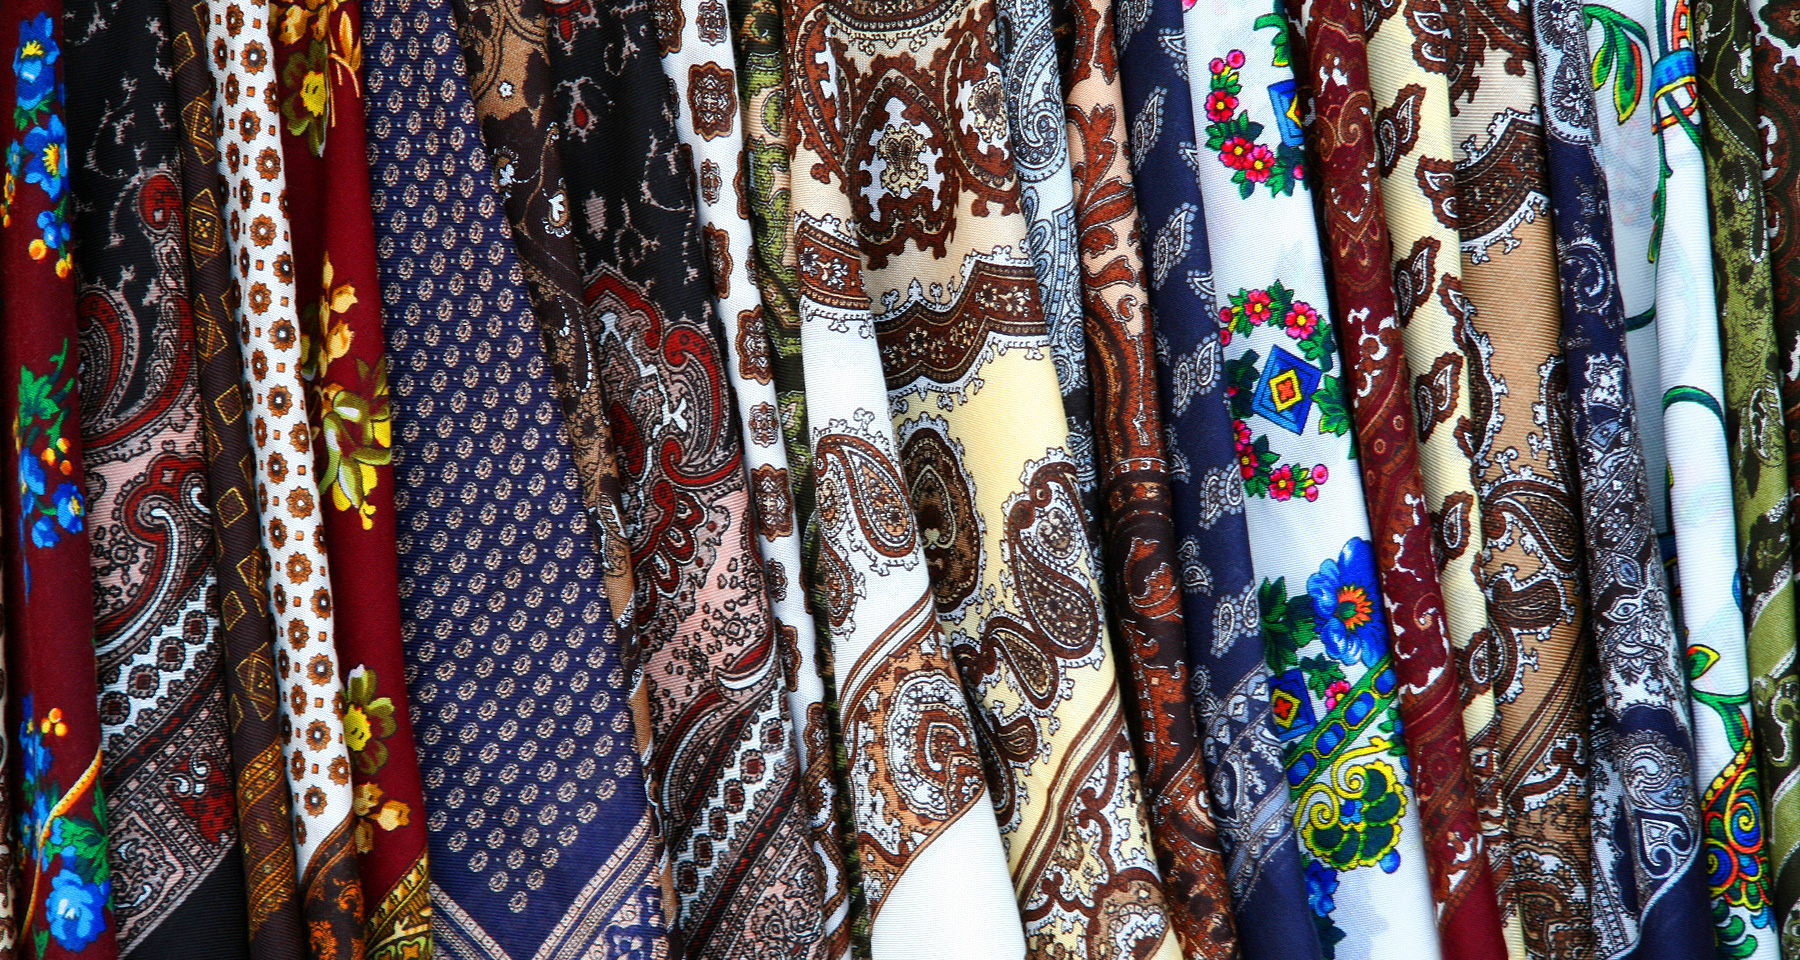 Colorful printed shawls and scarfs